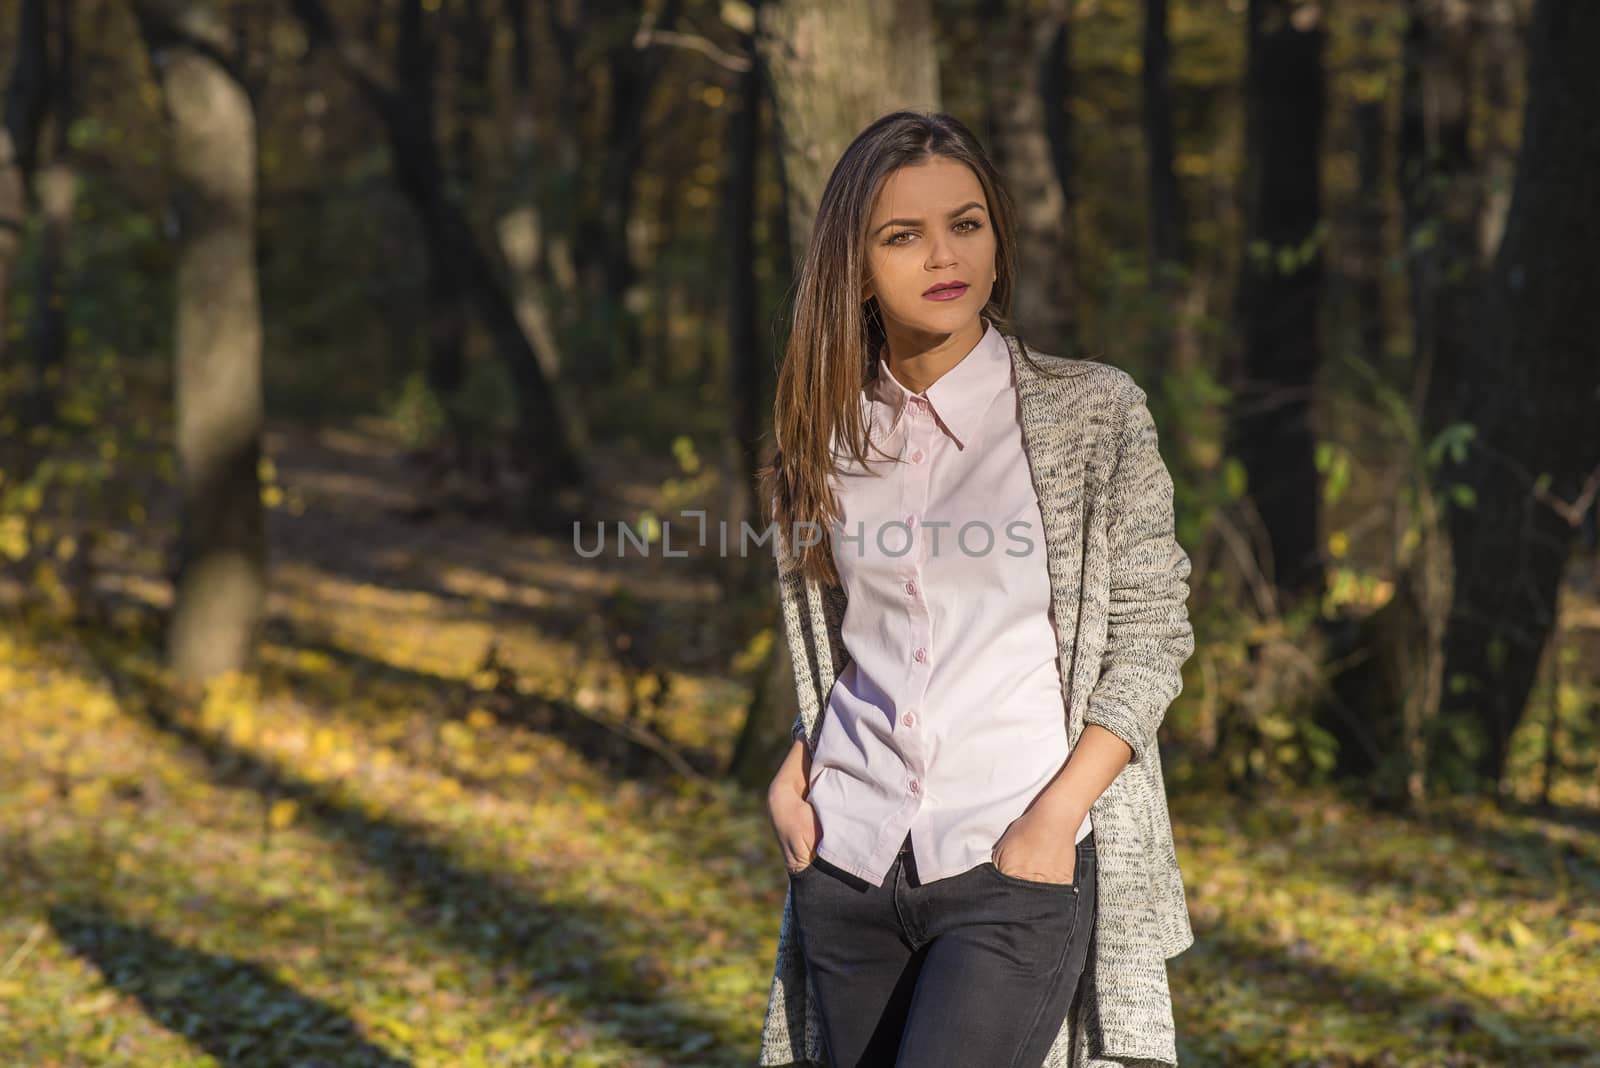 A pretty teenager girl is posing in an autumn oak forest at afternoon. She has a detached and thoughtful expression on her face. She is holding her hands in her jeans pockets. 